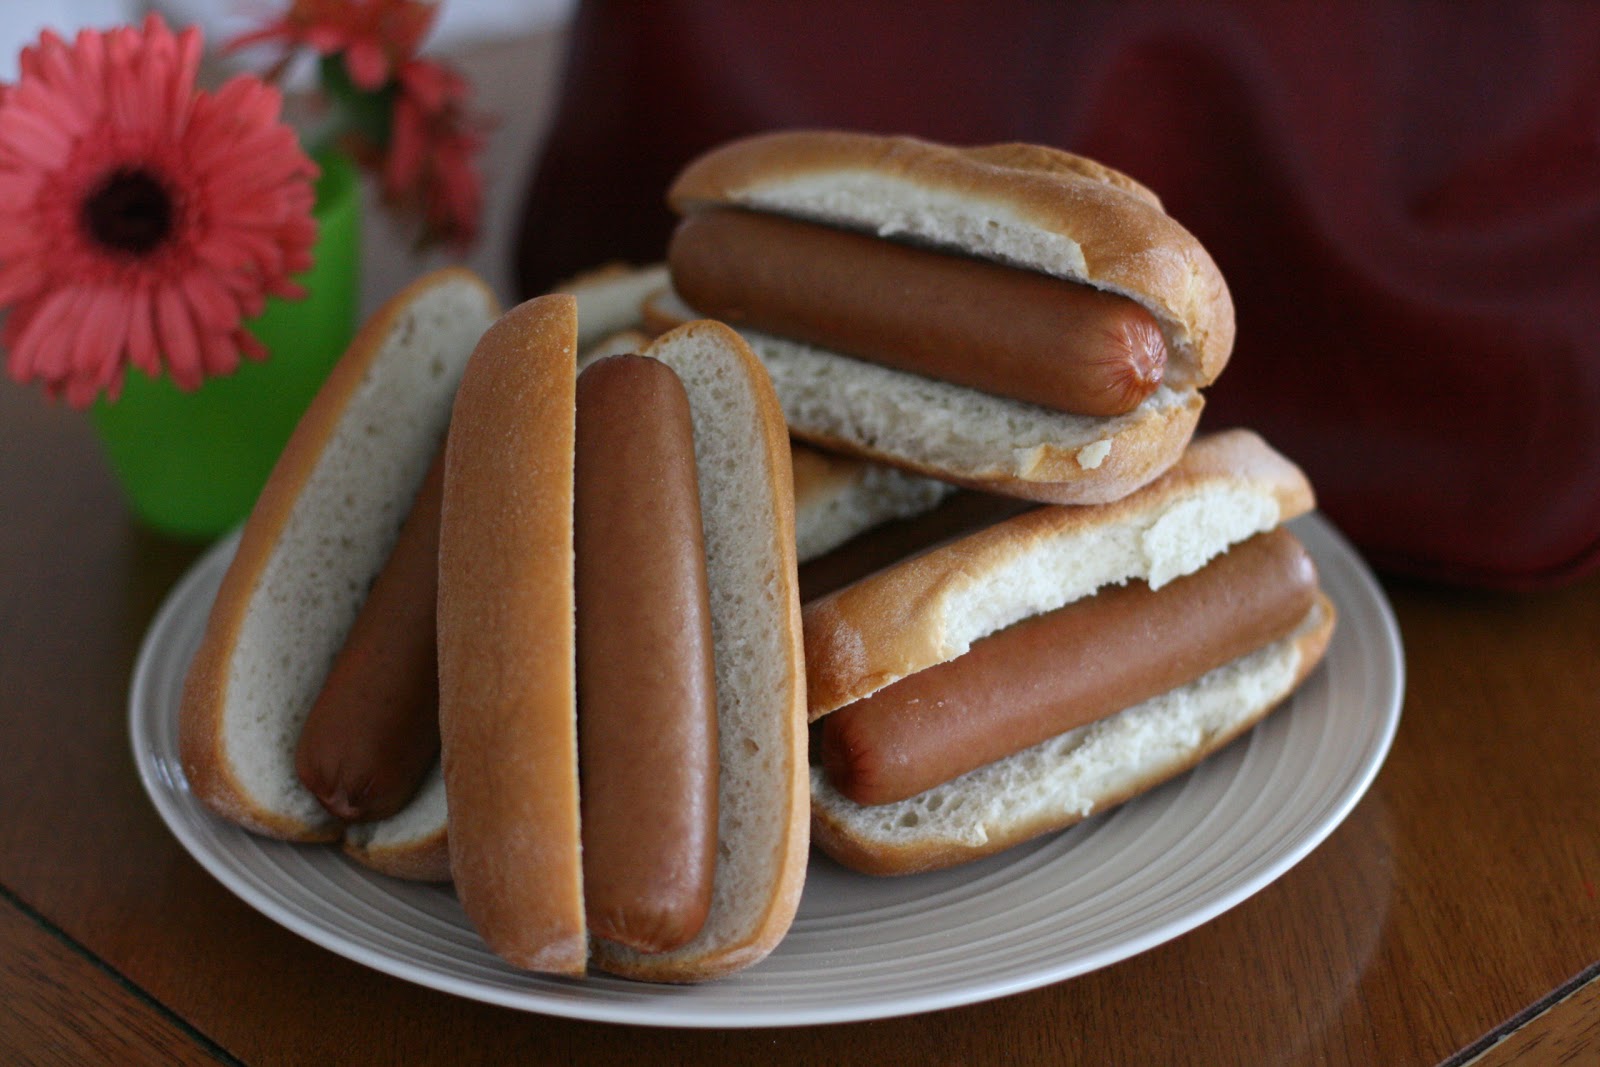 How long does it take to boil a hot dog?